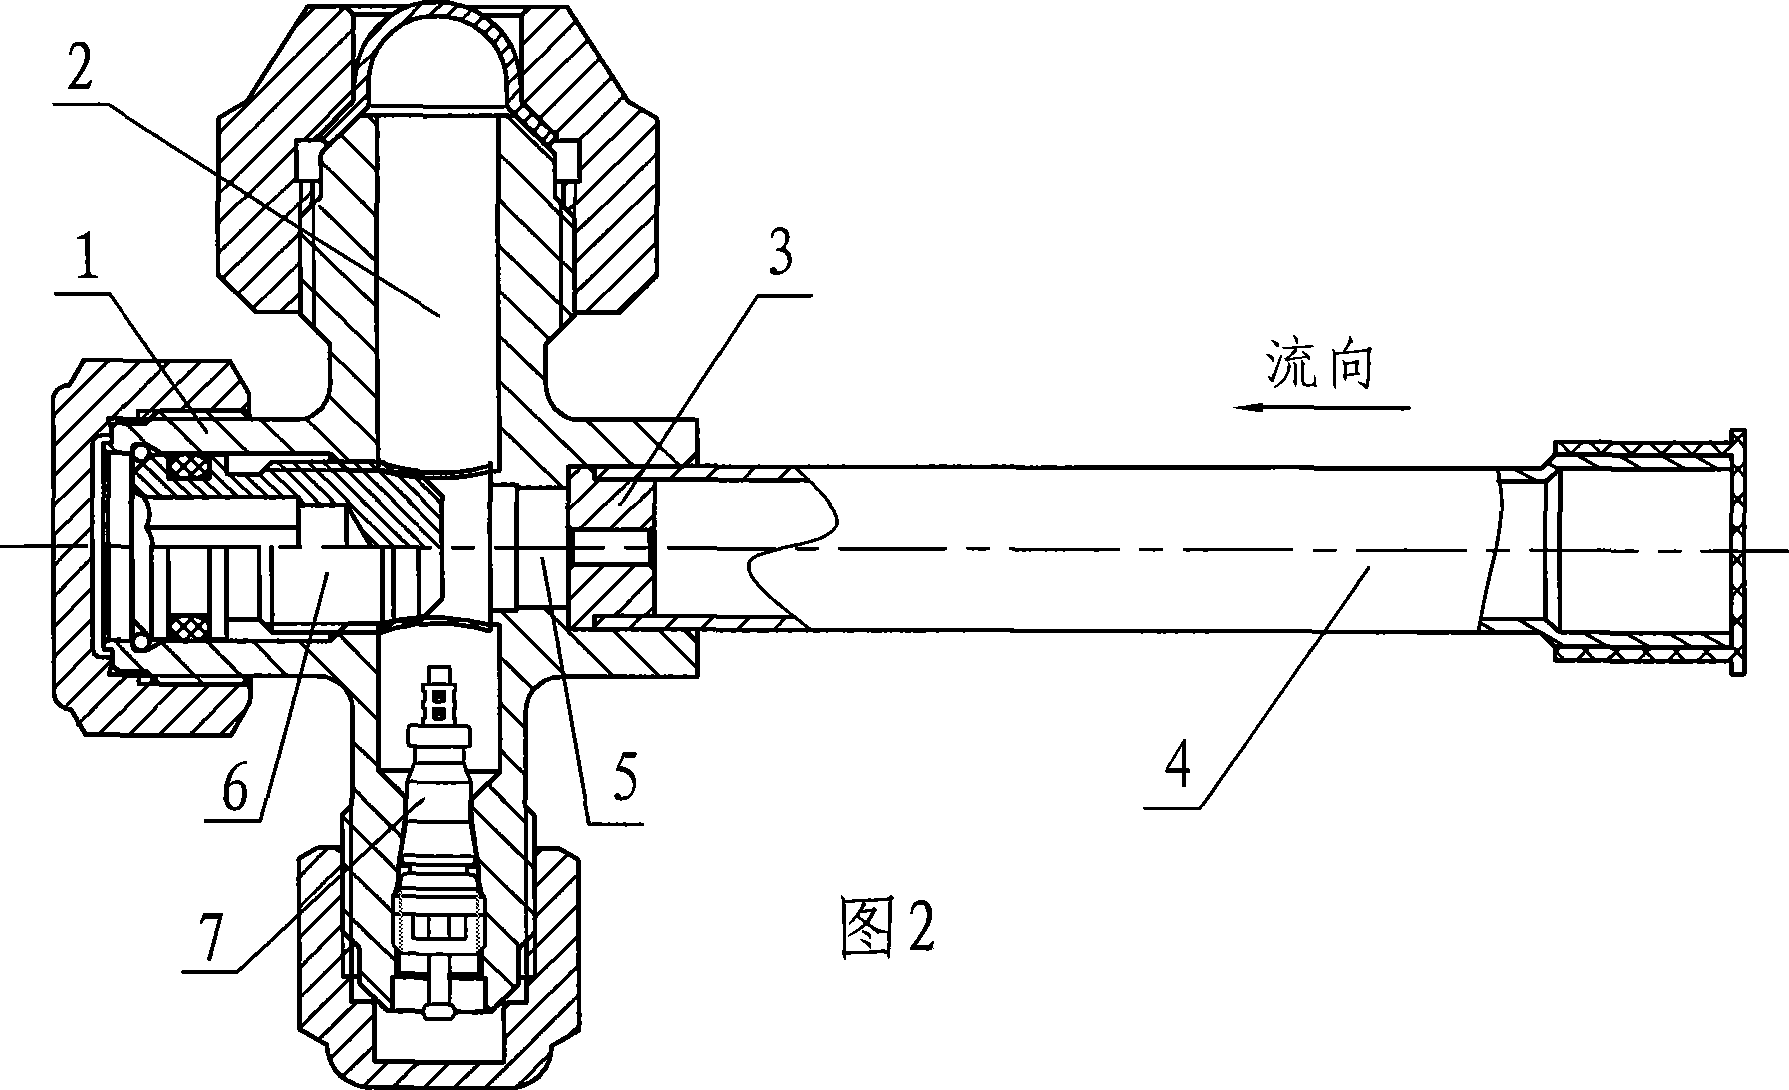 Throttling stop valve with throttling and cut-off dual function